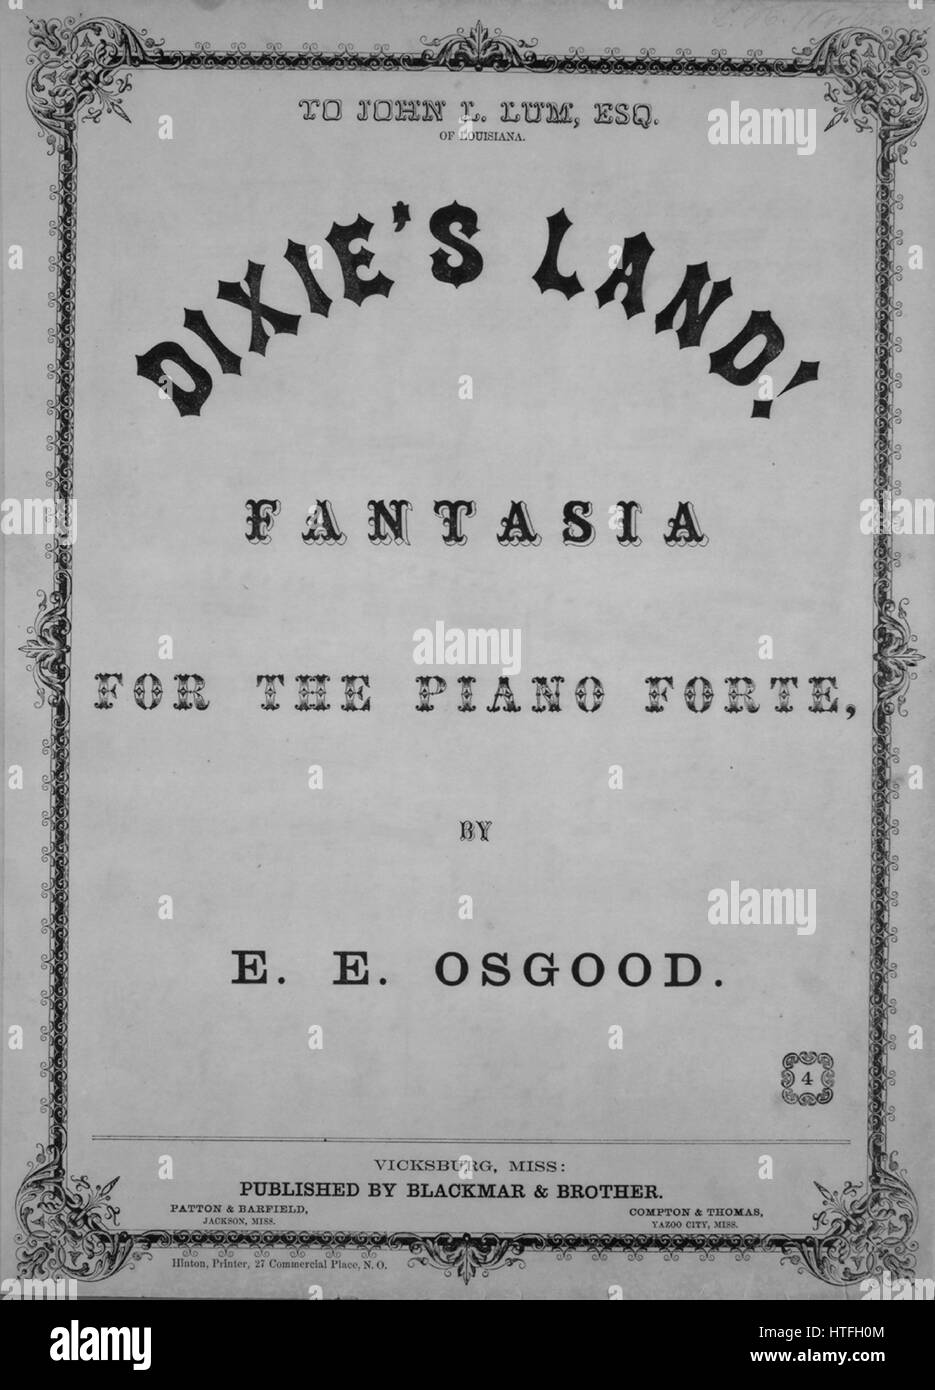 Sheet music cover image of the song 'Dixie's Land! Fantasia for the Piano Forte', with original authorship notes reading 'By EE Osgood', 1900. The publisher is listed as 'Blackmar and Brother', the form of composition is 'sectional', the instrumentation is 'piano', the first line reads 'None', and the illustration artist is listed as 'Hinton, Printer, 27 Commericial Place, N.O.; Wehrmann Eng. Pr.'. Stock Photo